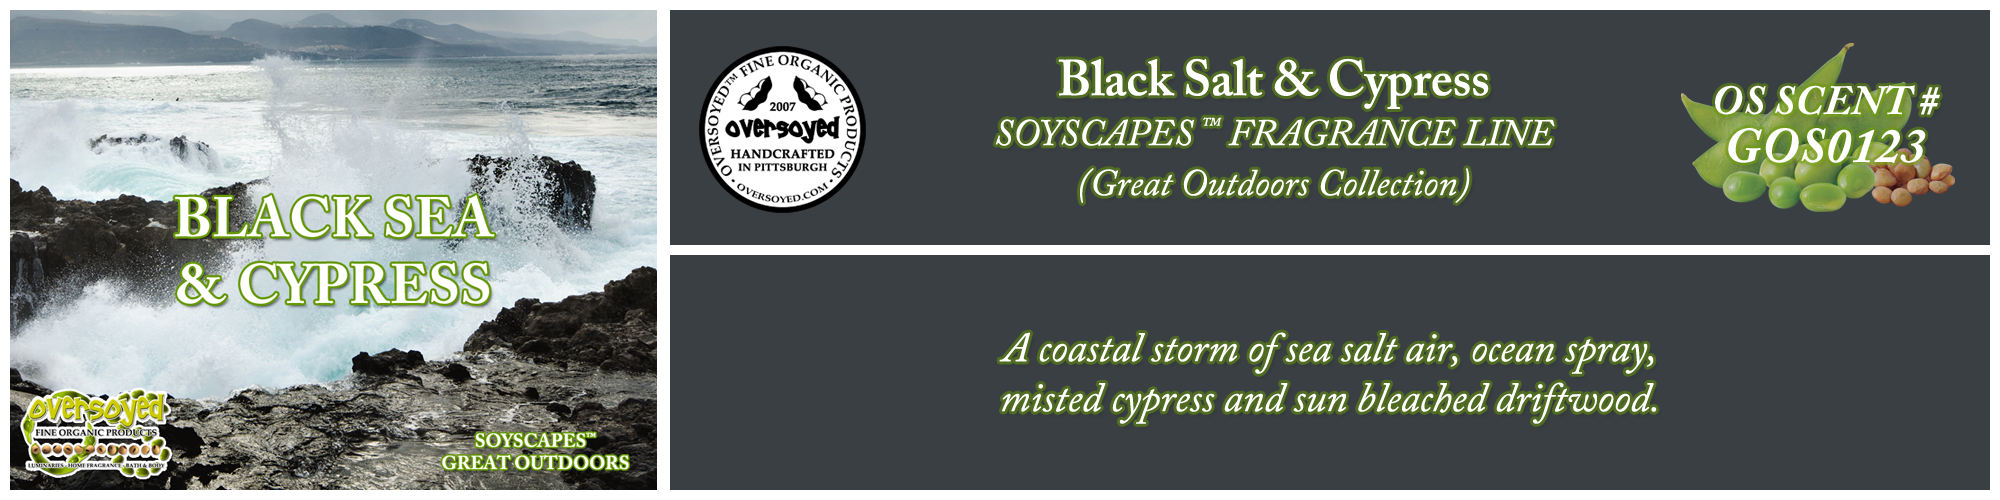 Black Salt & Cypress Handcrafted Products Collection